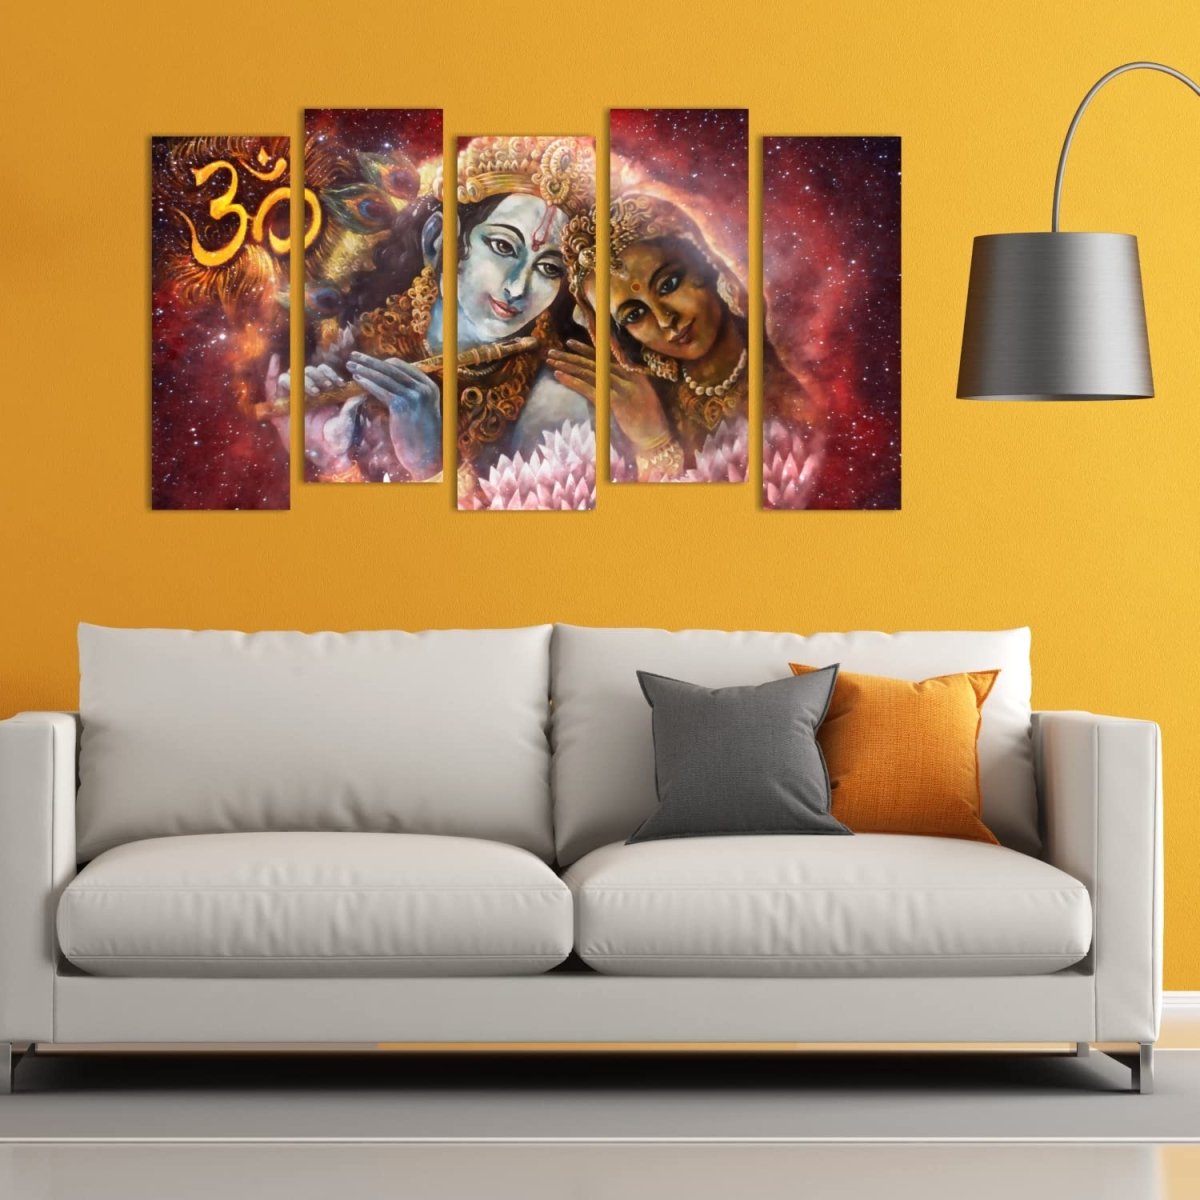 Metalkart Special Five Visions of Divine Love with the Om Wall Painting (Set of 5)